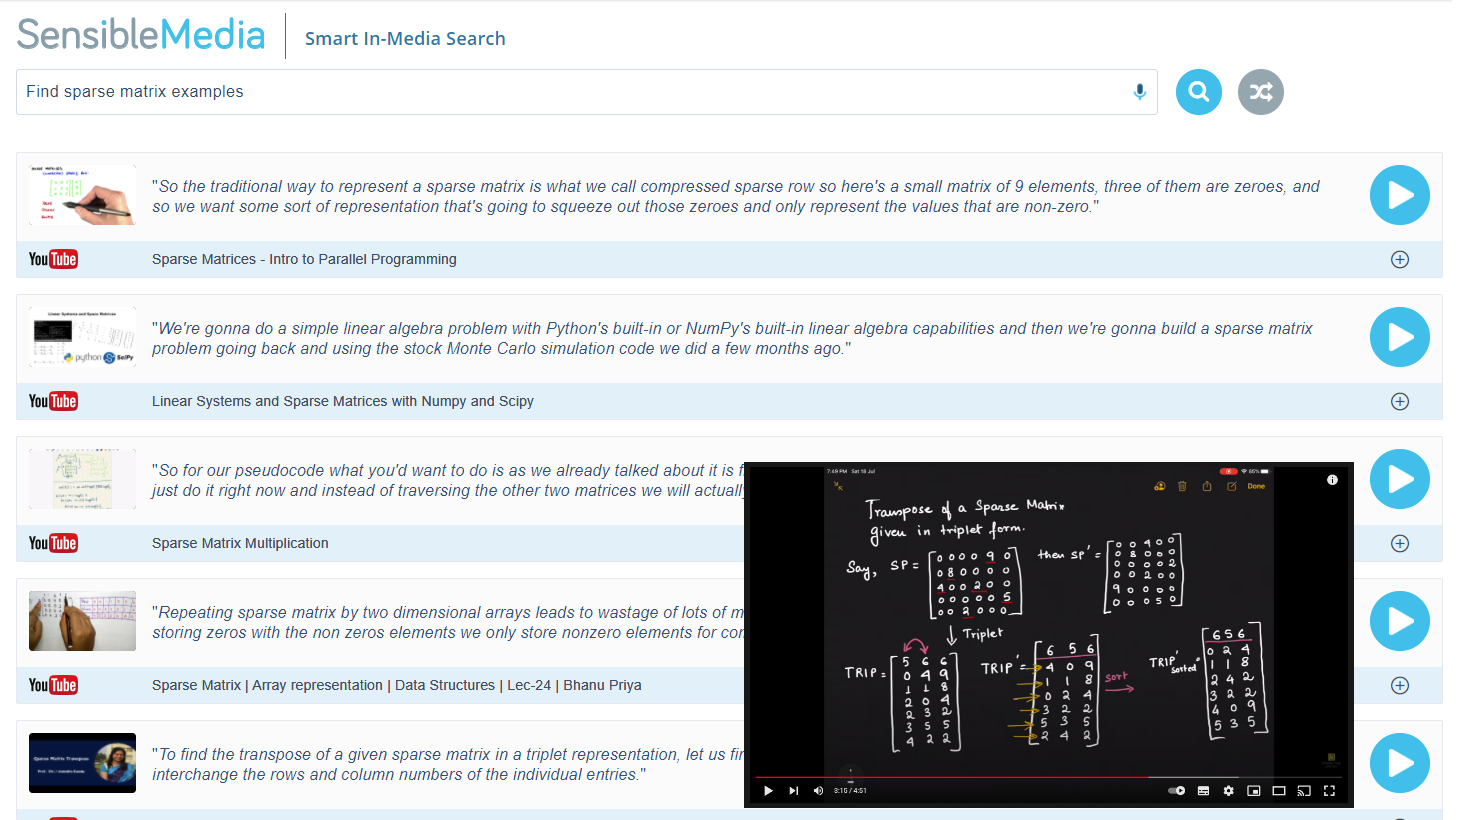 Using SensibleMedia to find examples of sparse matrices manipulation from tutorial videos.